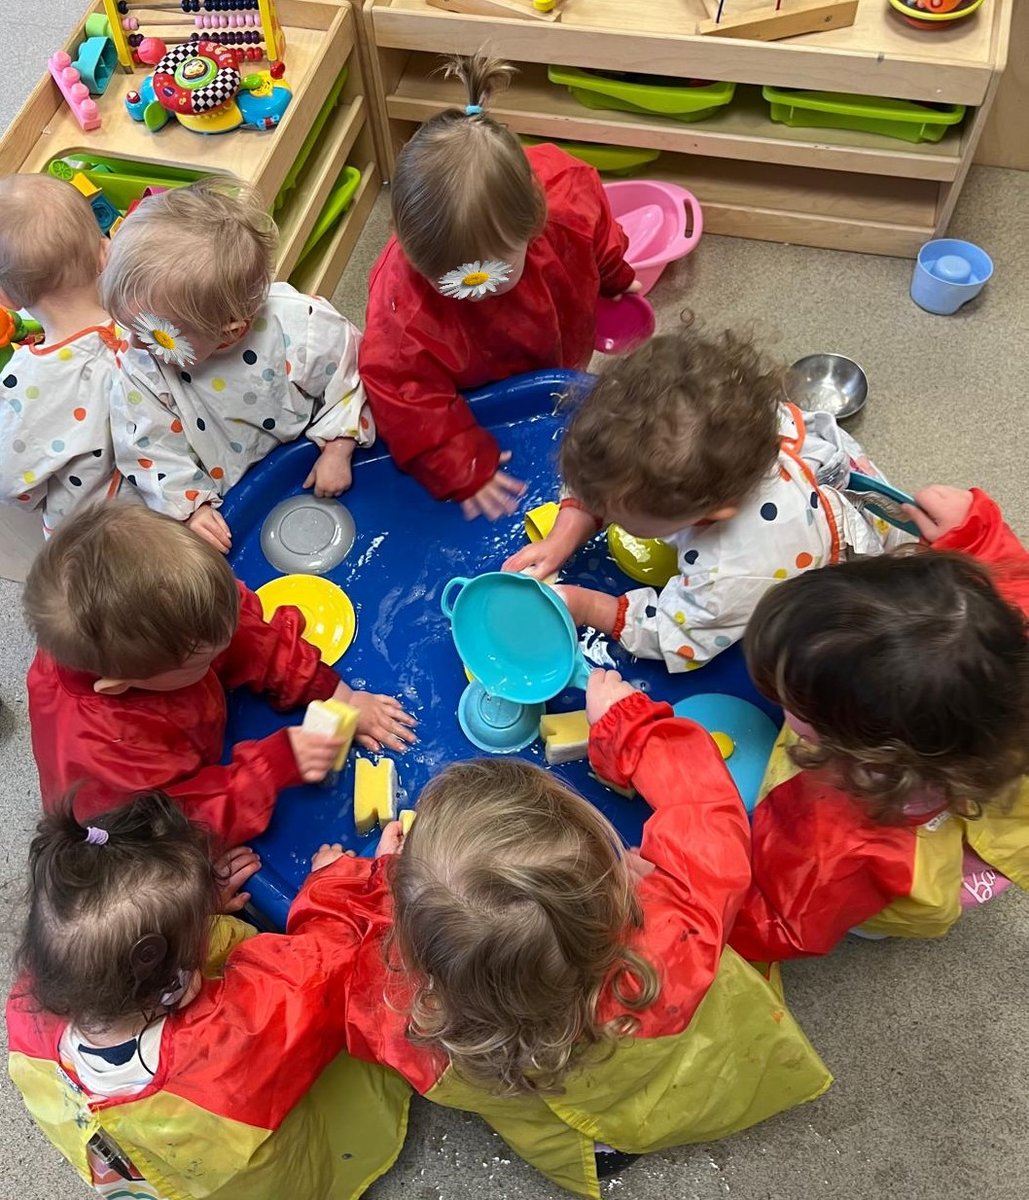 𝐓𝐞𝐫𝐞𝐧𝐮𝐫𝐞 𝐂𝐞𝐧𝐭𝐫𝐞: Many hands make light work for these wobblers while cleaning their room #daisychaincare #childcaredublin #daisychaindub #wobblers #terenure